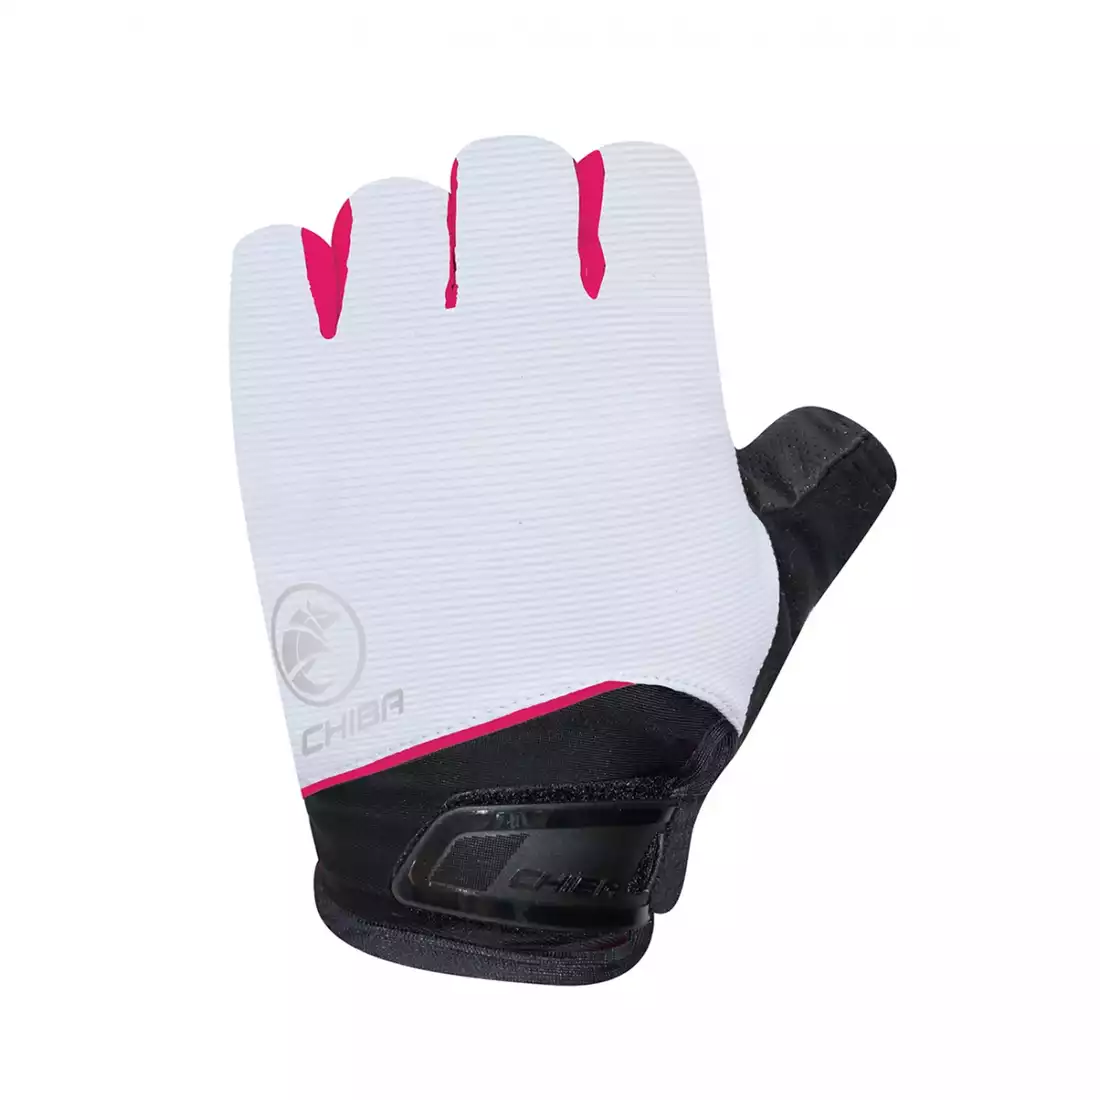 CHIBA BIOXCELL LADY Women's cycling gloves, white